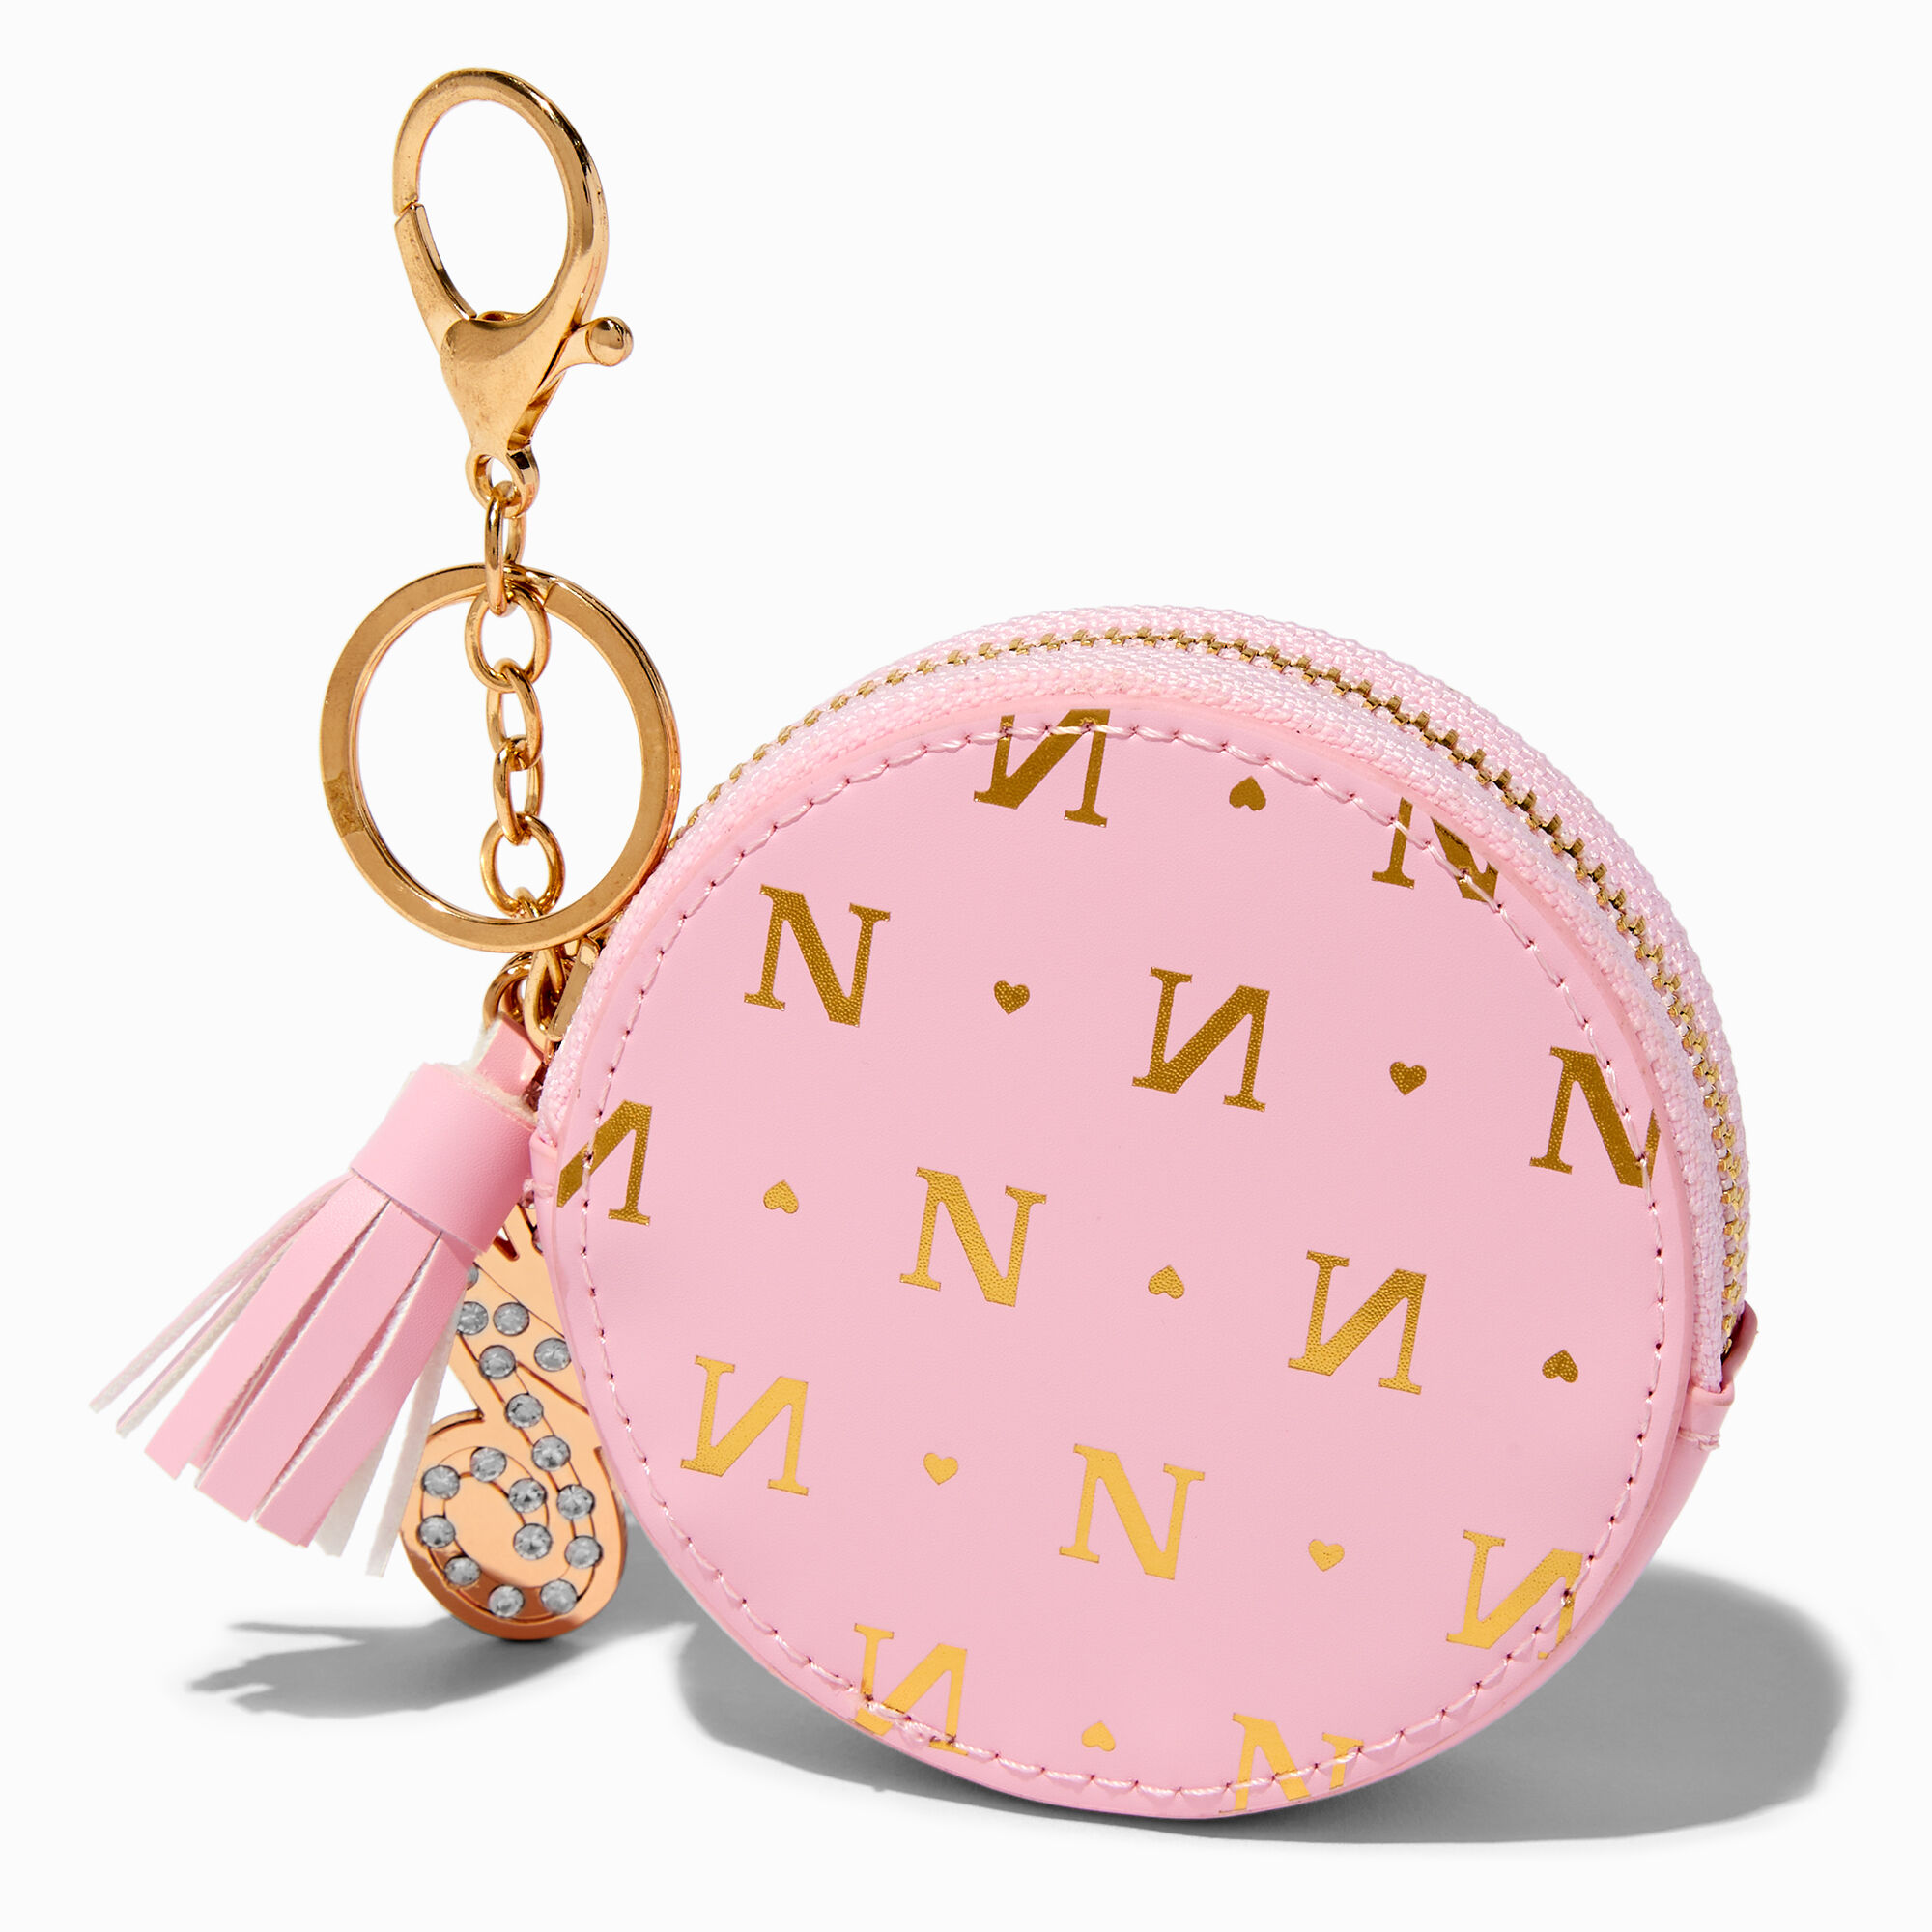 View Claires en Initial Coin Purse N Gold information